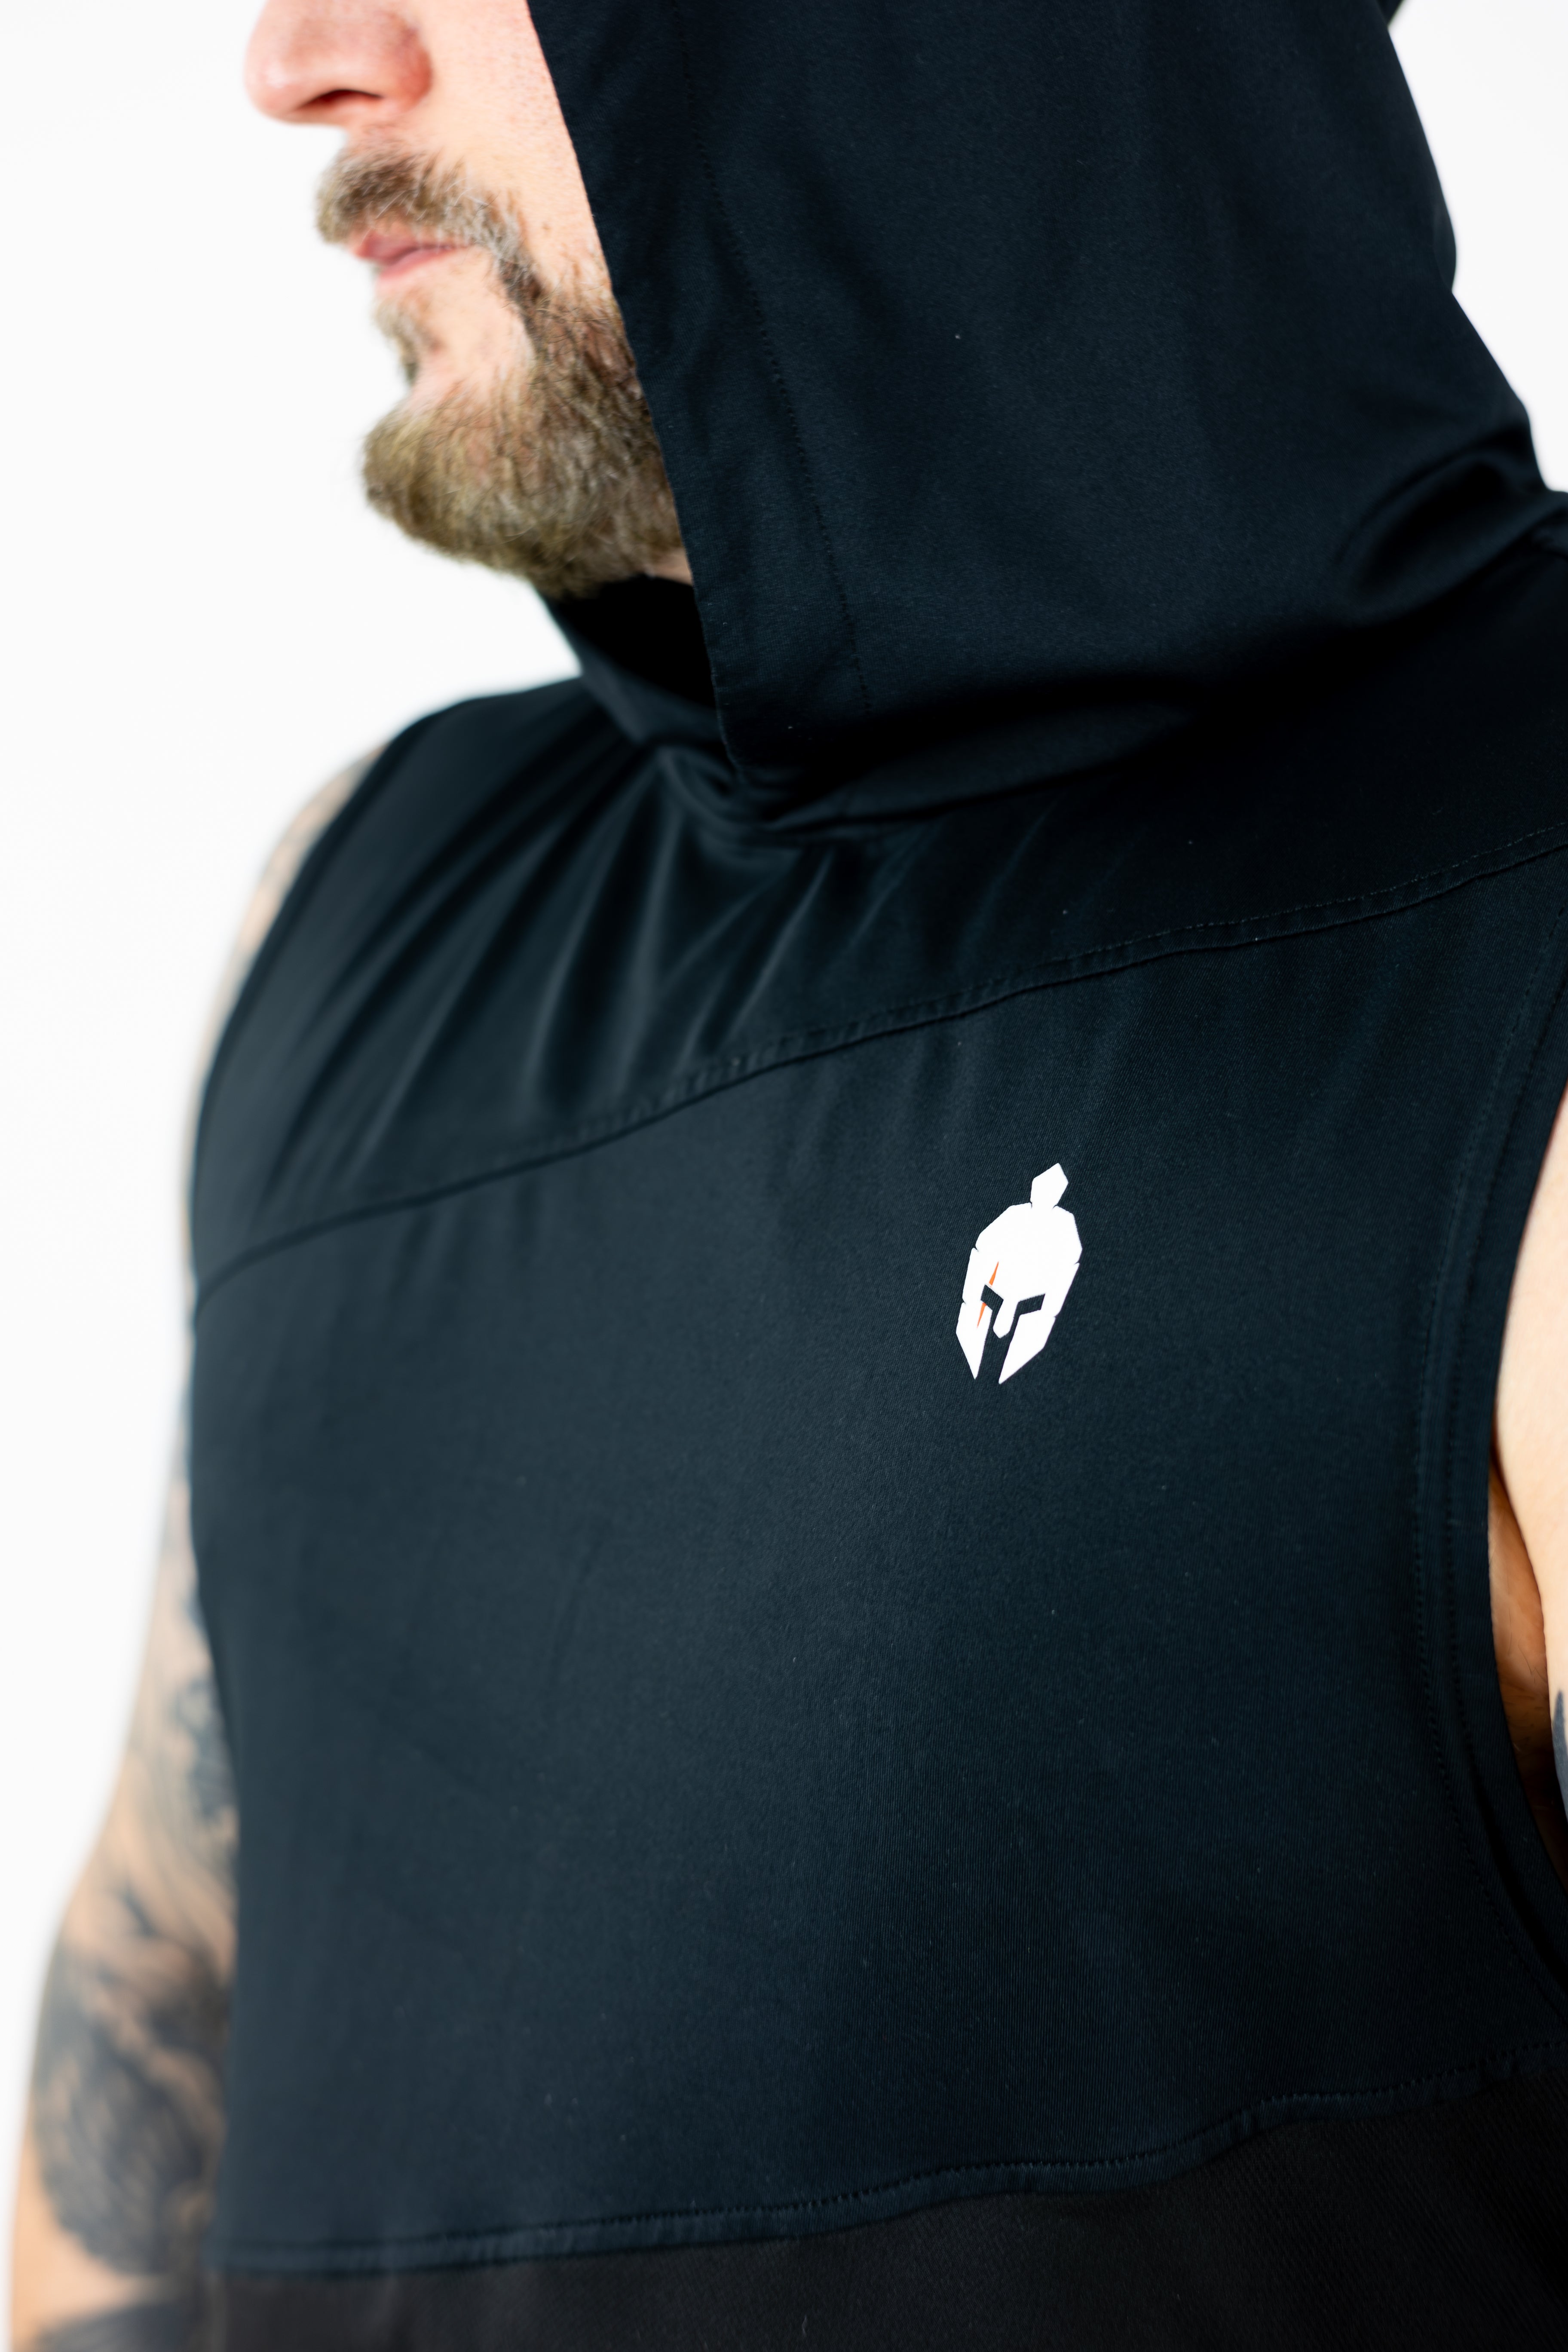 man wearing black hooded strength of one tank top with white helmet warrior logo on right chest